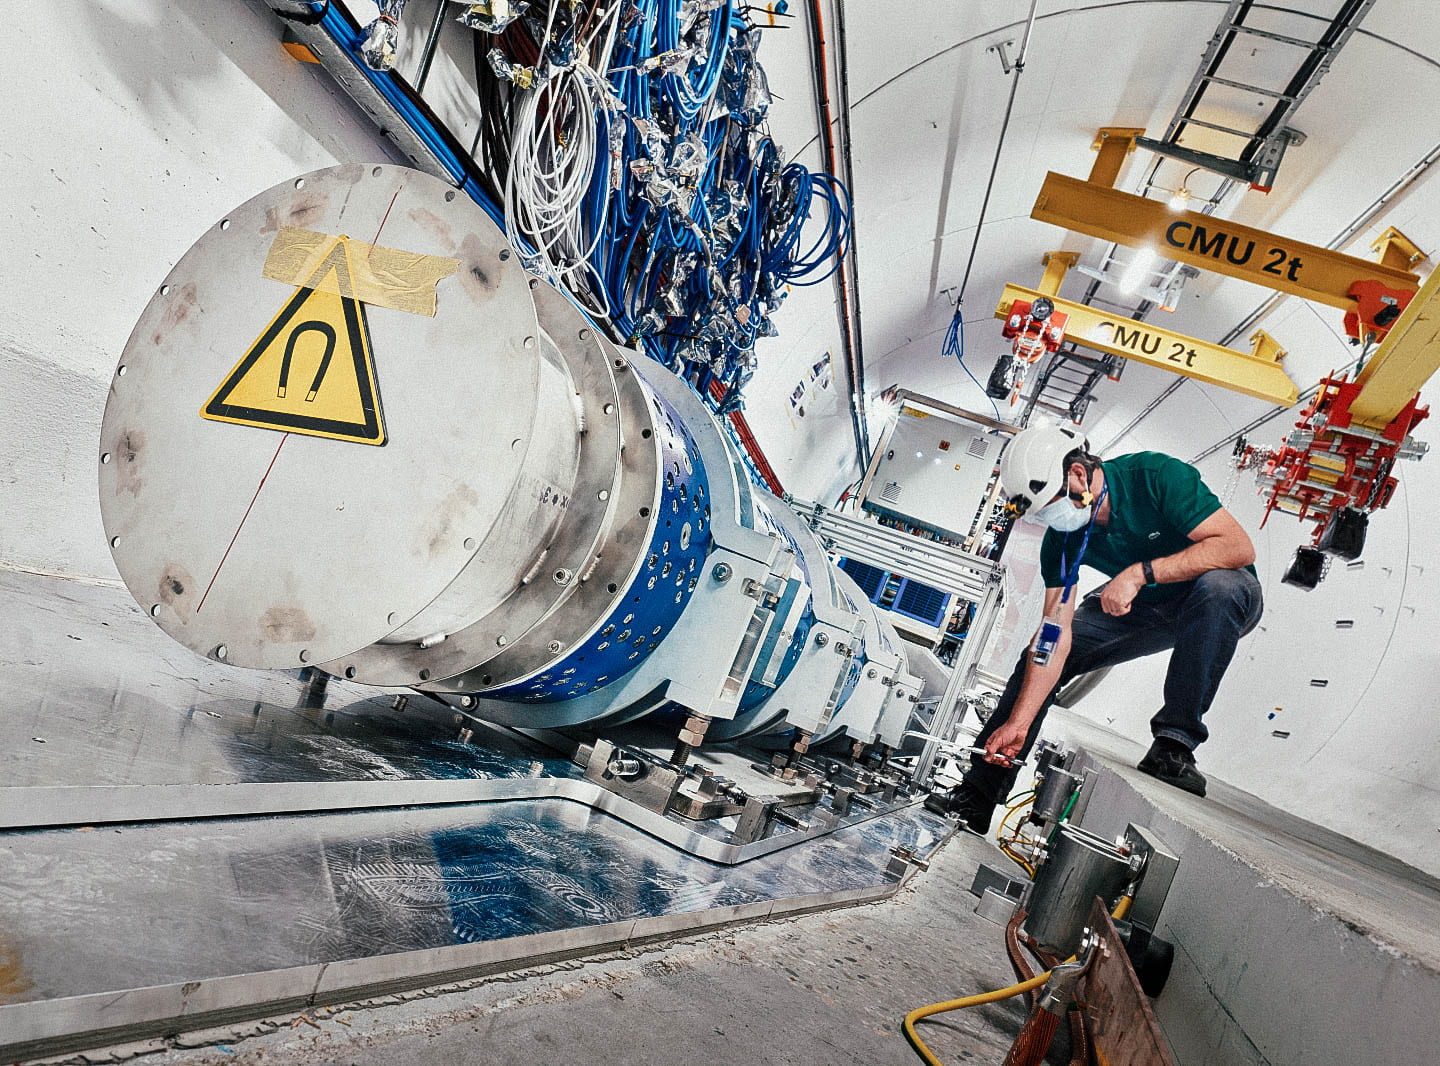 The FASER particle detector that received CERN approval to be installed at the Large Hadron Collider in 2019 has recently been augmented with an instrument to detect neutrinos.